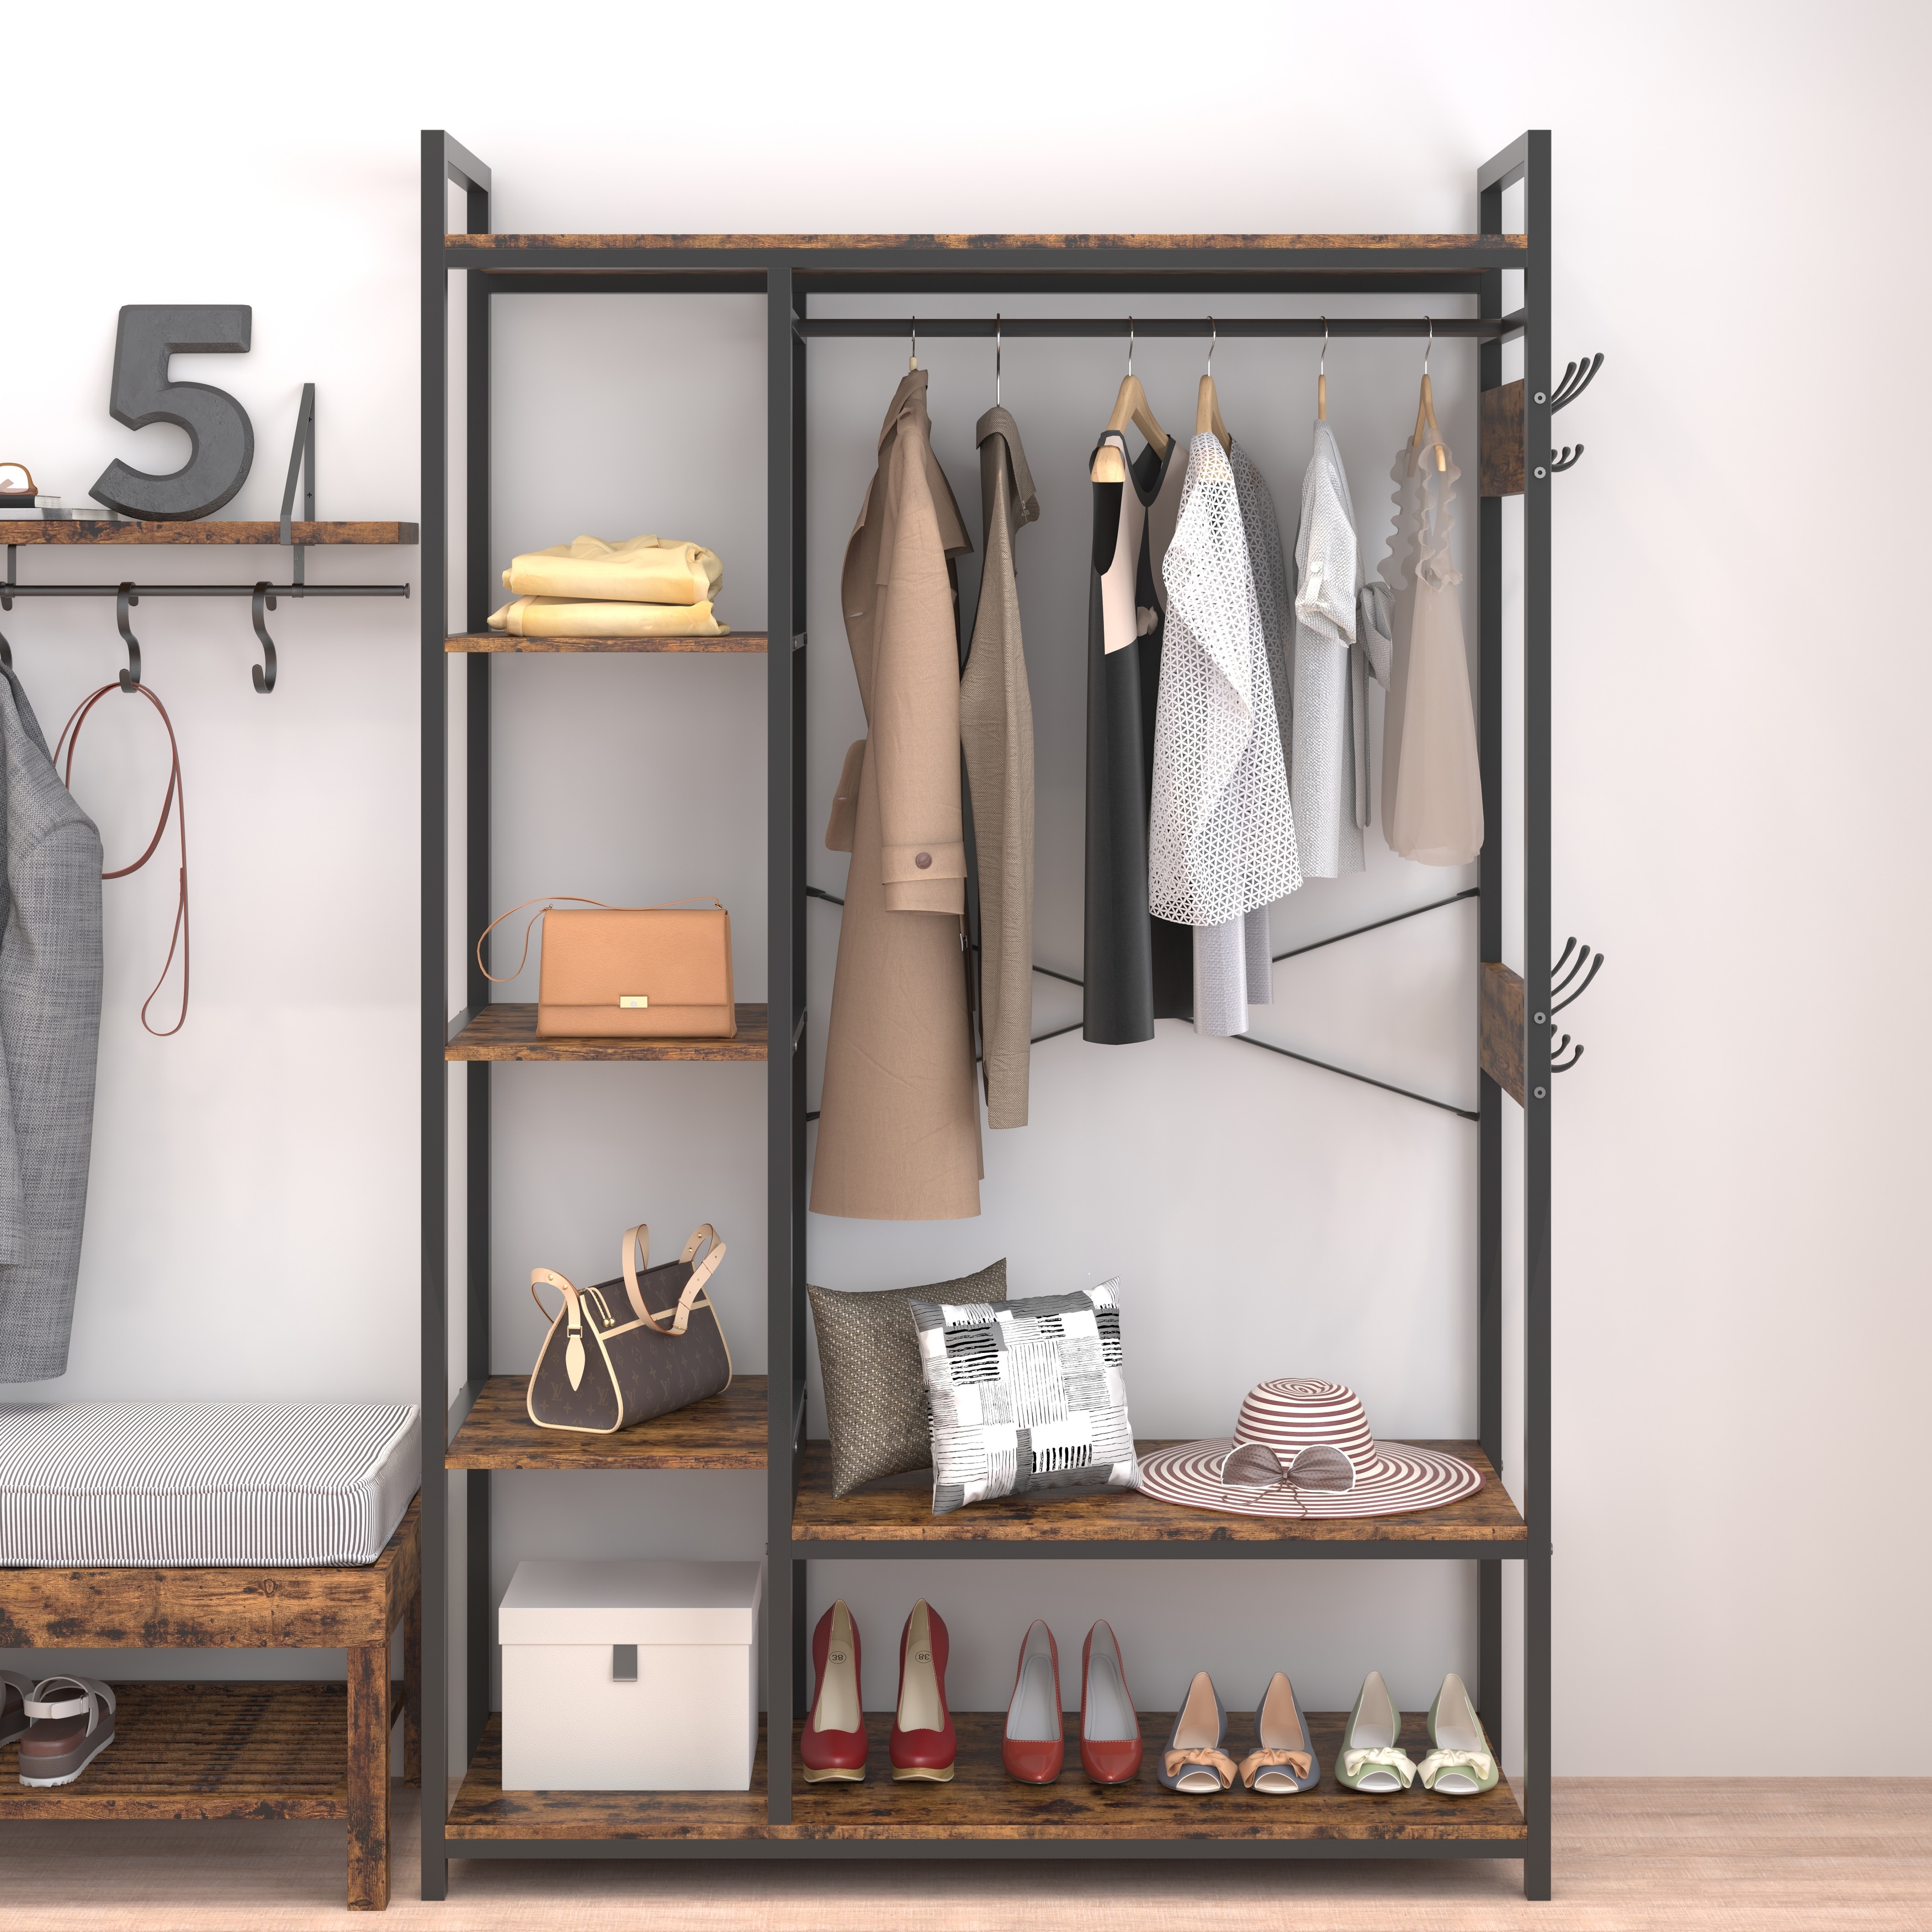 https://ak1.ostkcdn.com/images/products/is/images/direct/8d0aae30a2e00782471592df071035b6831ff51d/Free-Standing-Closet-Organizer-with-Storage-Box-Side-Hook%2C-Portable-Garment-Rack-with-6-Shelves-Hanging-Rod%2C-Black-Metal-Frame.jpg